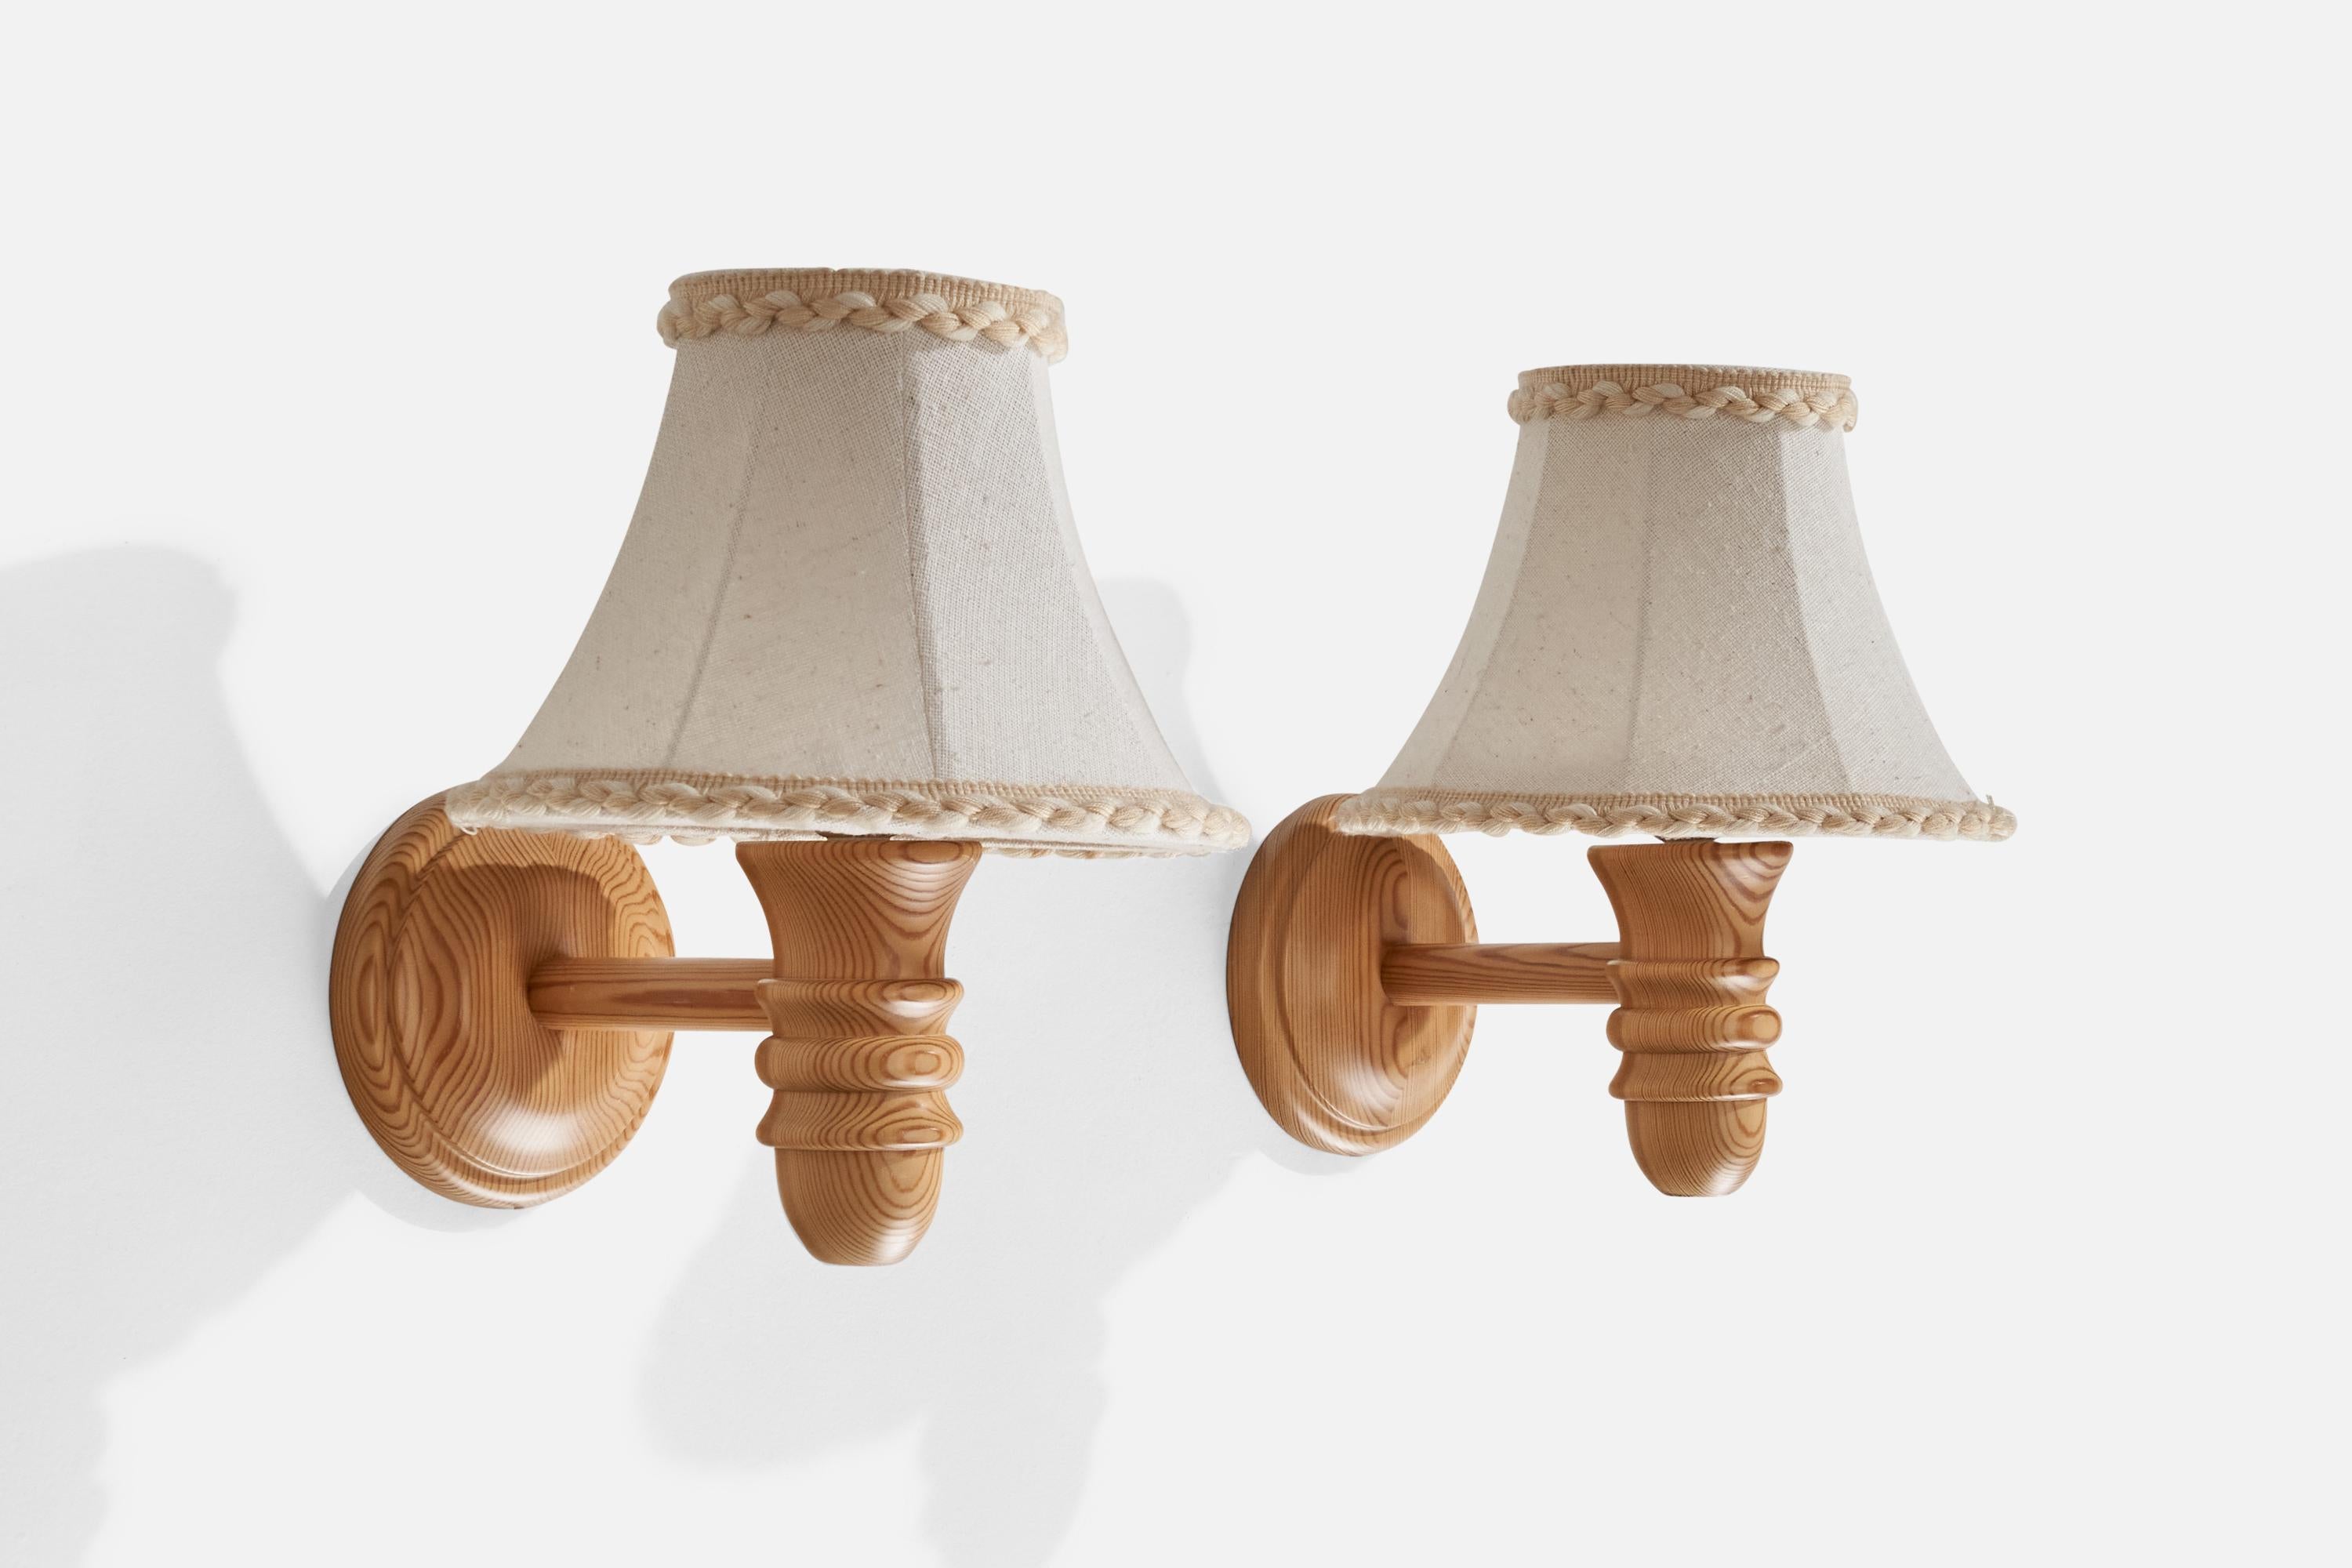 A pair of pine and cream white fabric wall lights designed and produced in Sweden, c. 1970s.

Overall Dimensions (inches): 11” H x 9.875” W x 11.5” D
Back Plate Dimensions (inches): 5.75” H x 1.26” D
Bulb Specifications: E-26 Bulb
Number of Sockets: